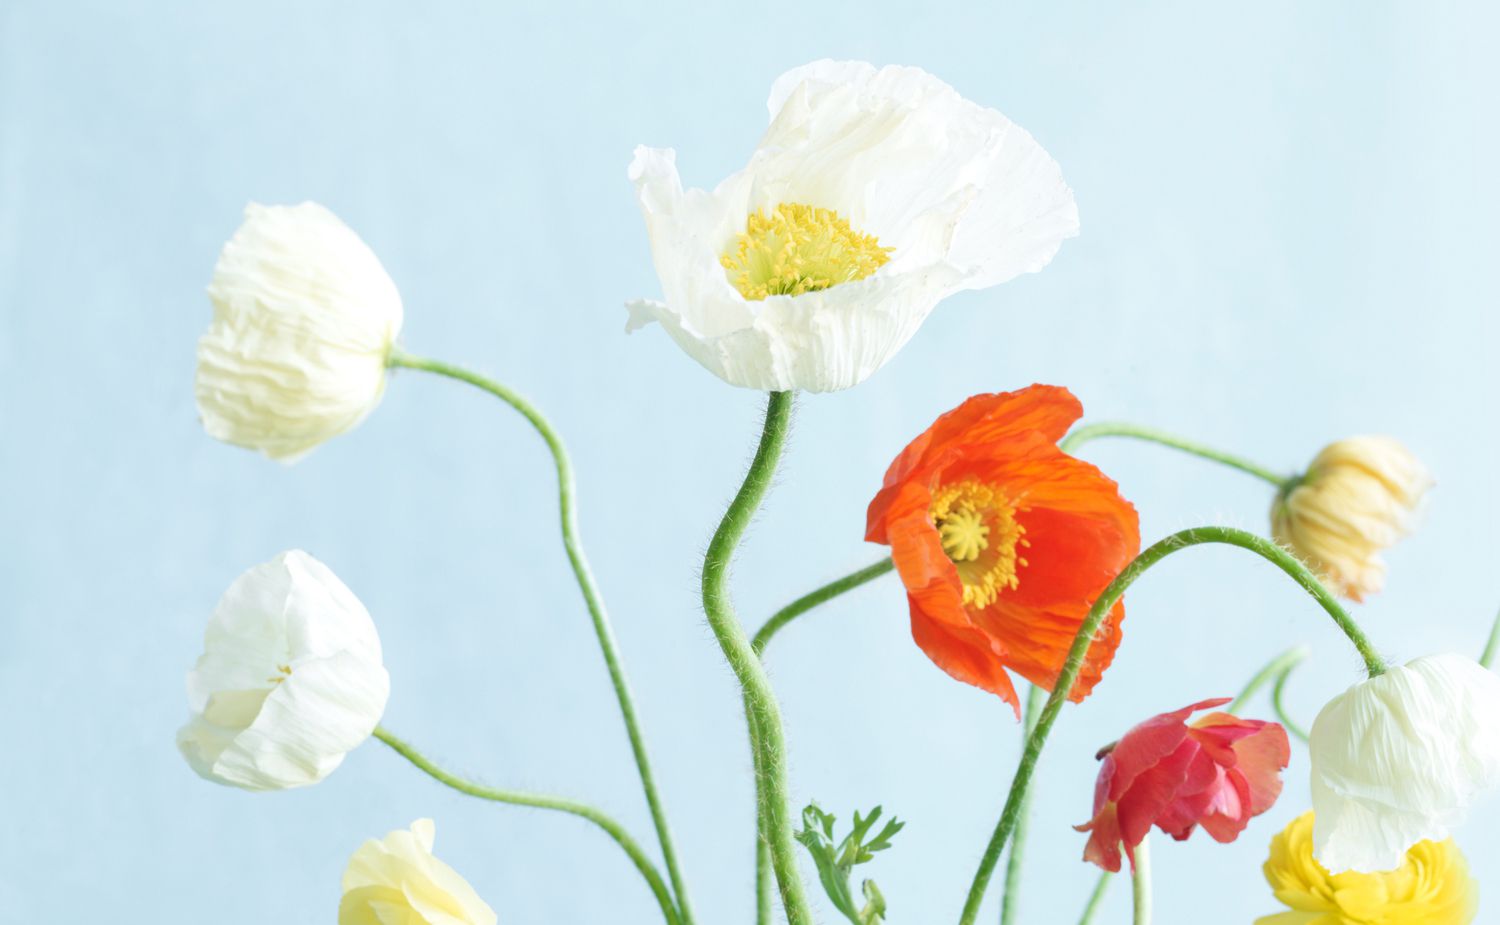 How To Keep Poppies In A Vase